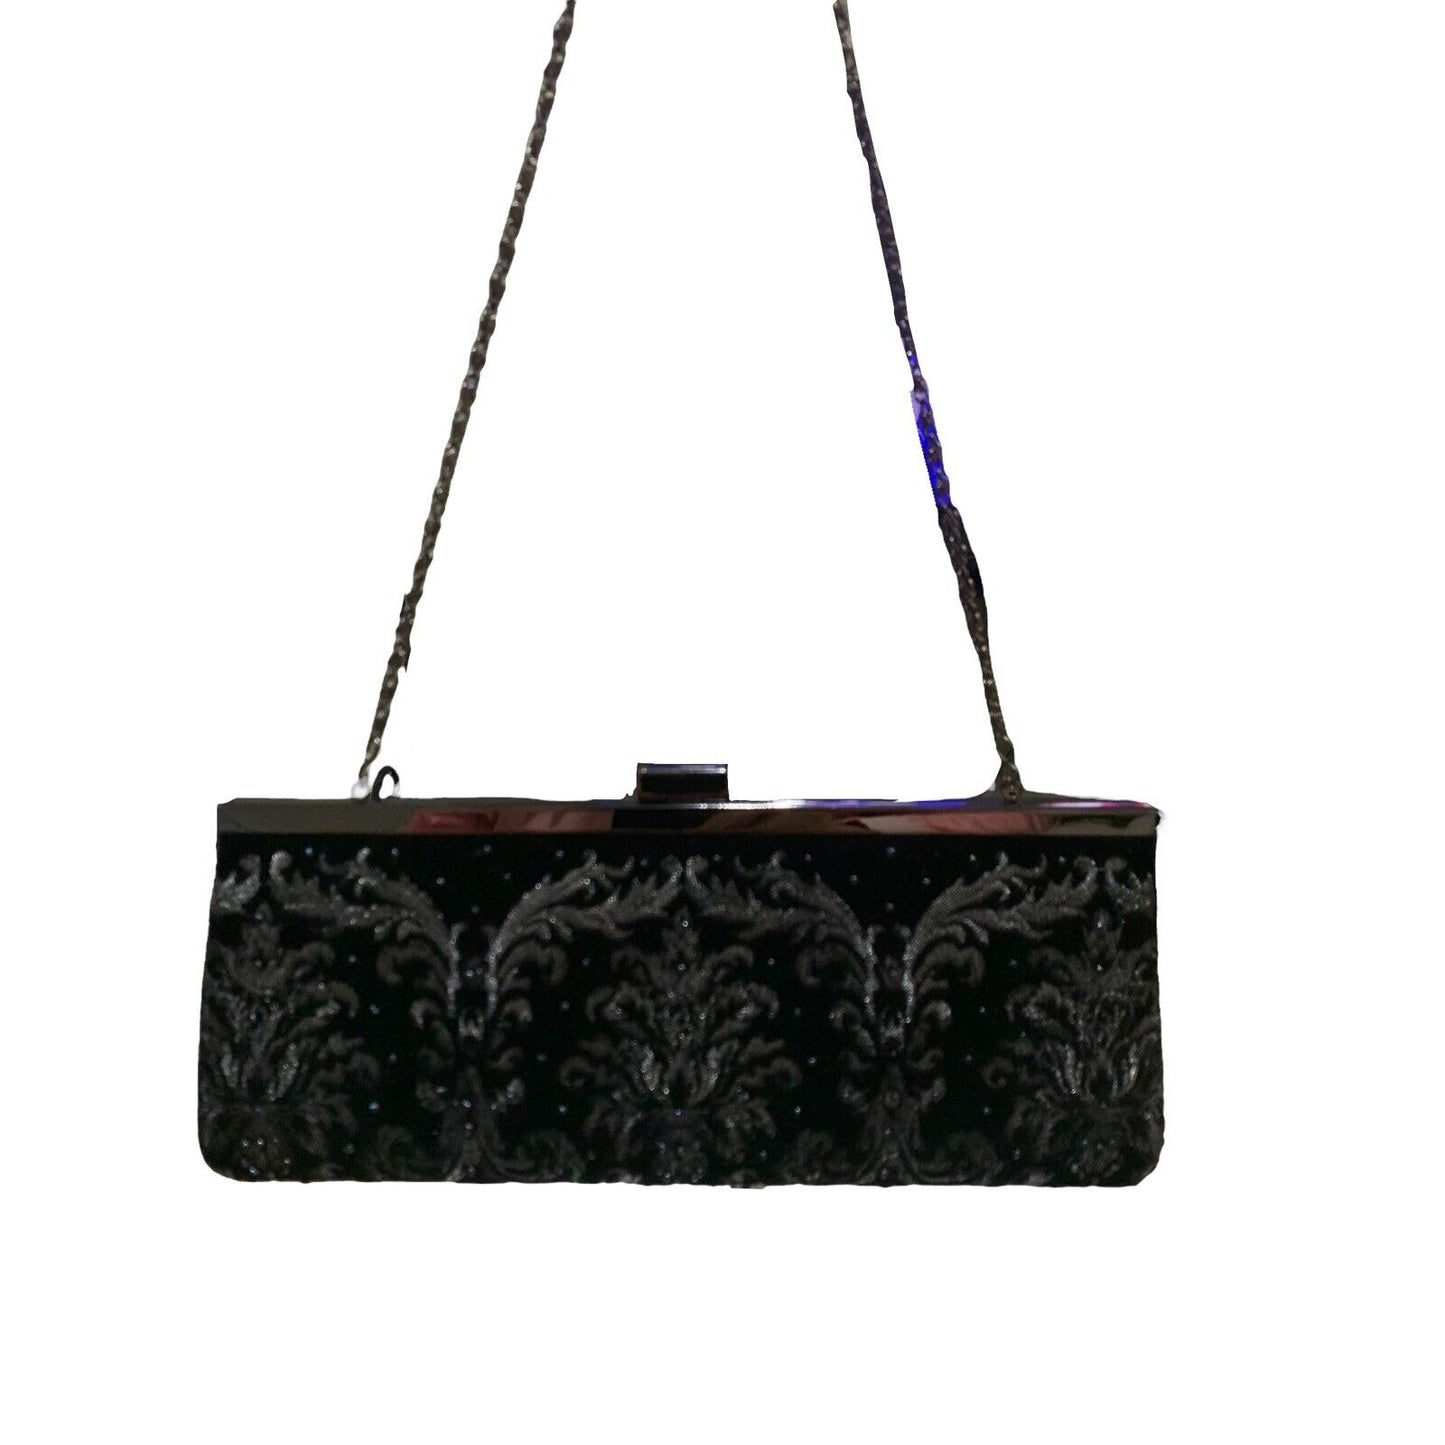 Velvet and Metallic Evening Clutch/Shoulder Bag by Lord and Taylor